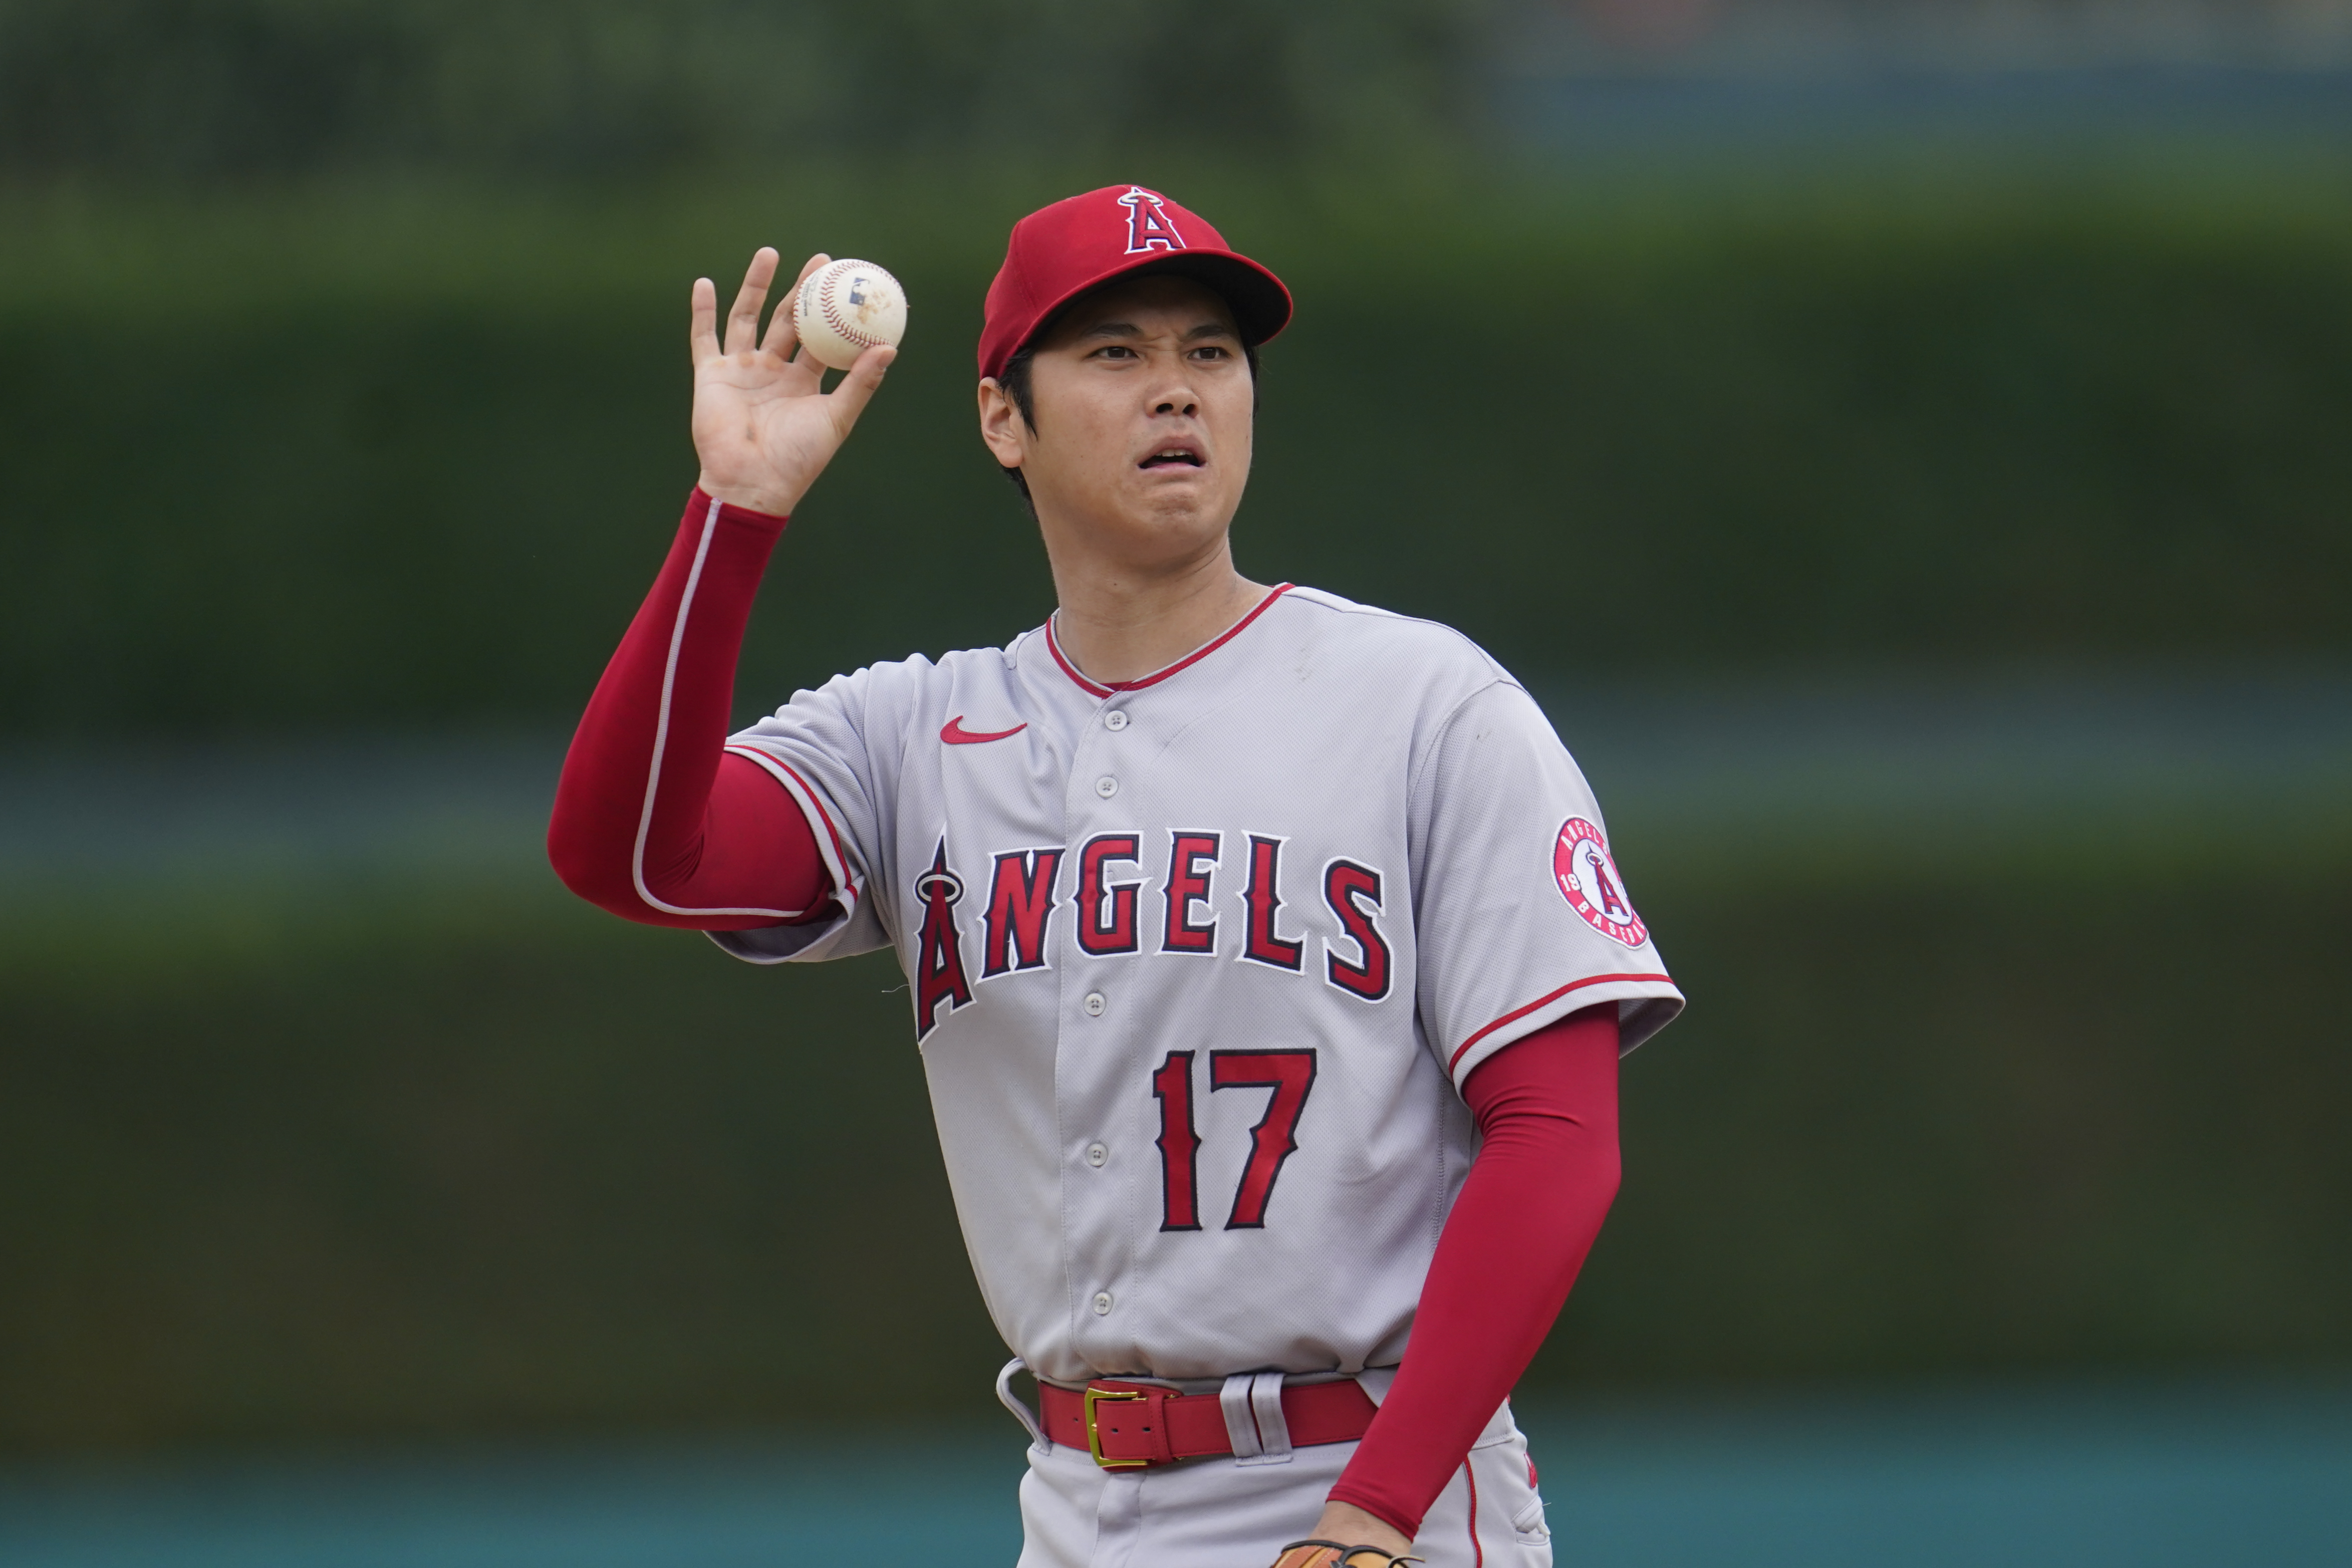 Angels tout 'outstanding' relationship with Shohei Ohtani as NL